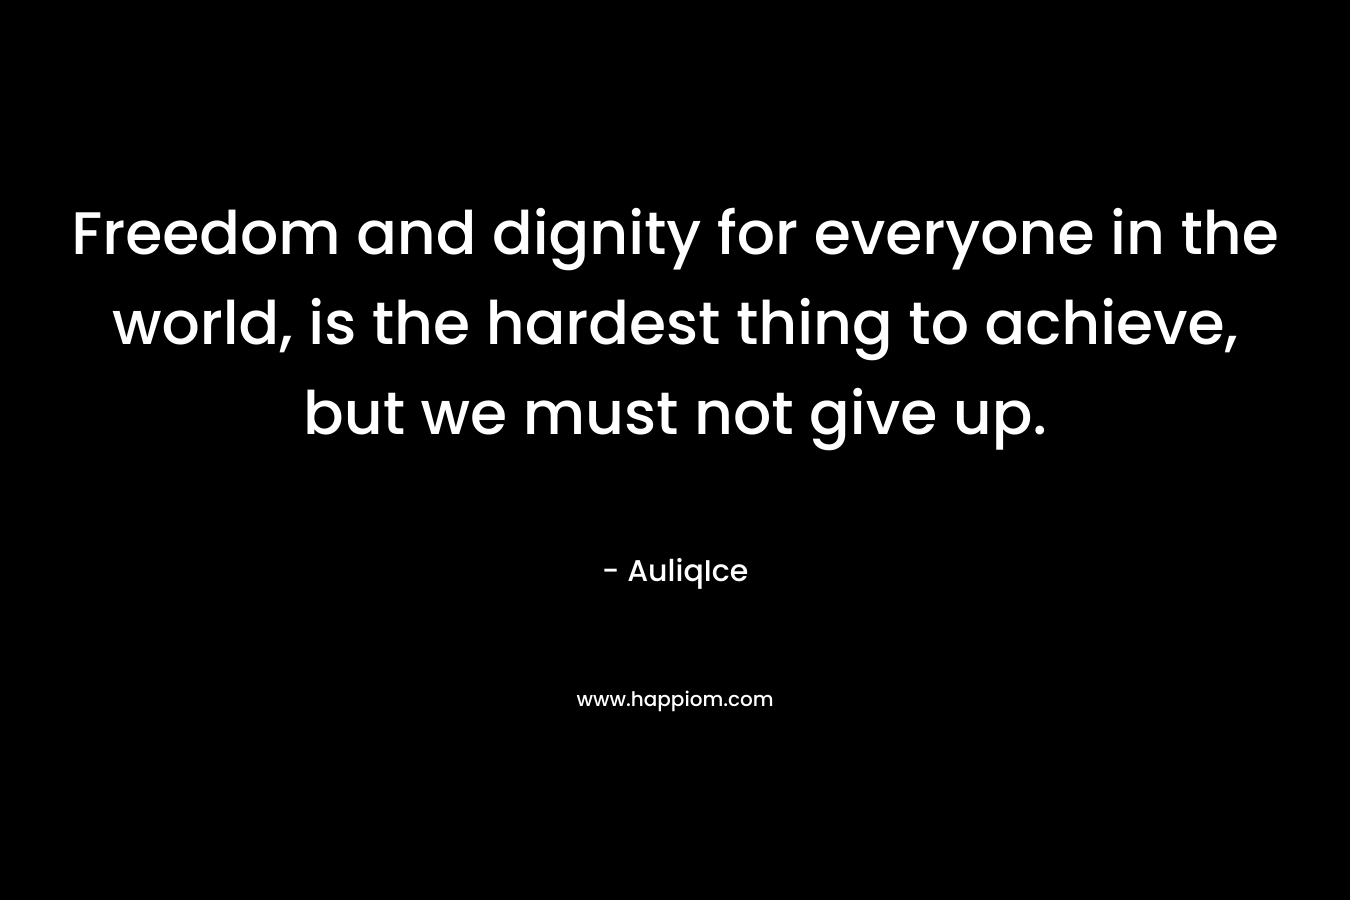 Freedom and dignity for everyone in the world, is the hardest thing to achieve, but we must not give up.